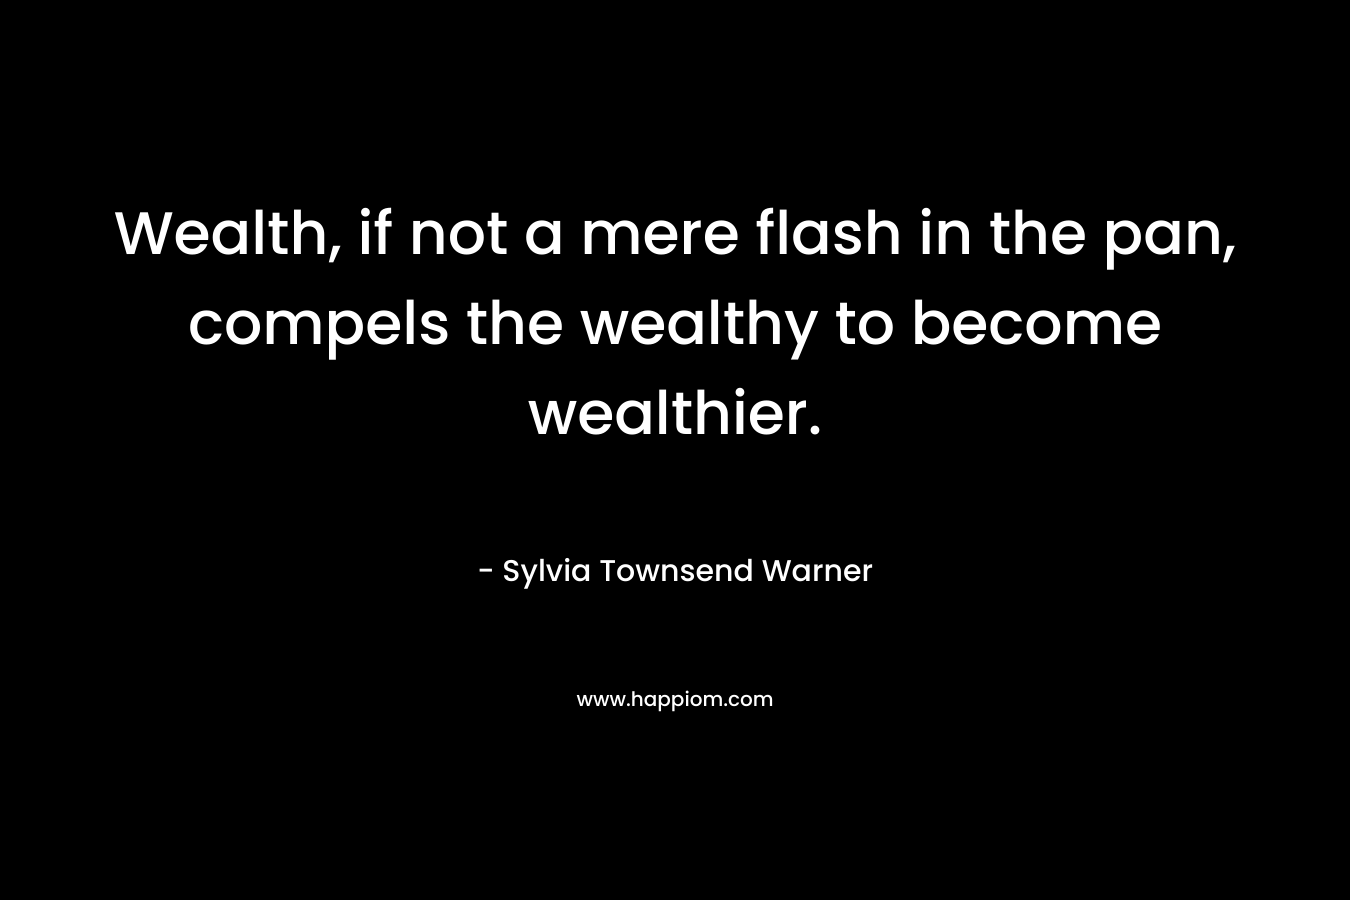 Wealth, if not a mere flash in the pan, compels the wealthy to become wealthier. – Sylvia Townsend Warner